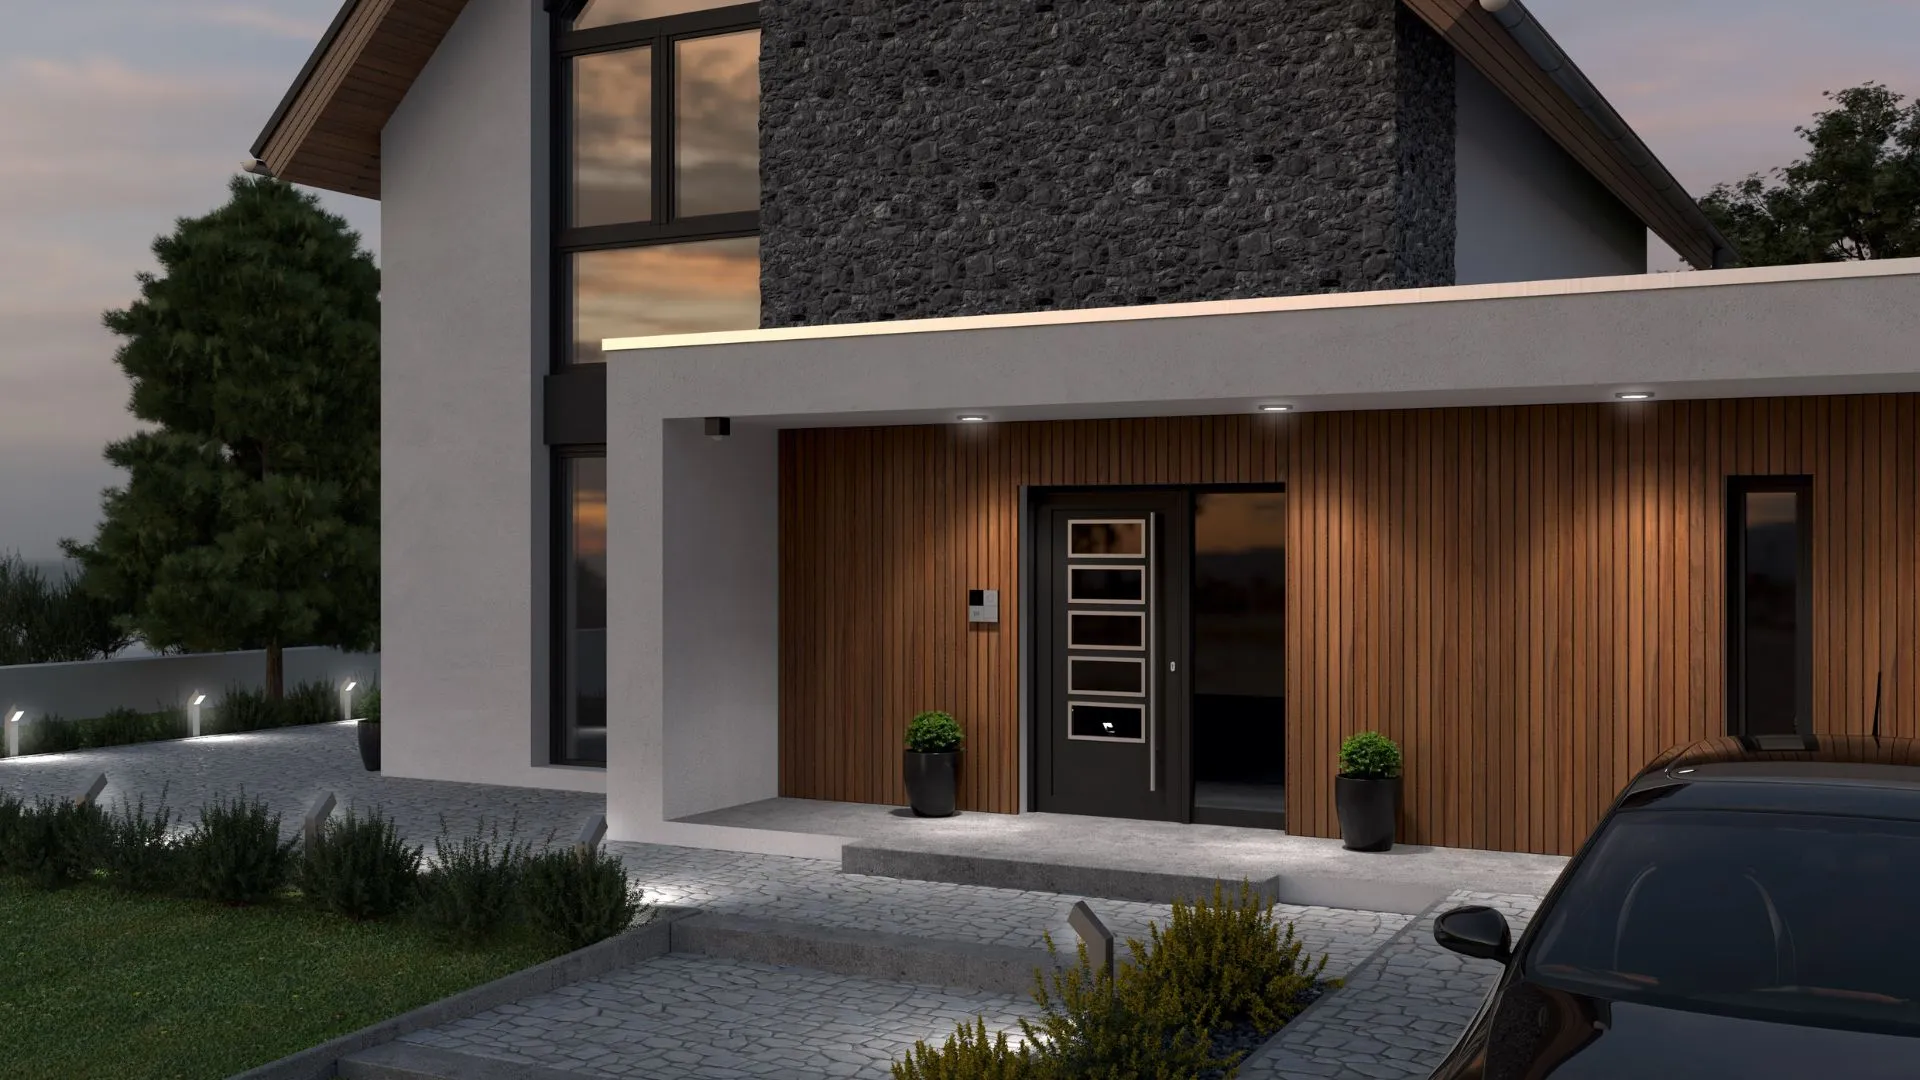 An elegant modern house with a contrasting facade, wood accents, and outdoor lighting.